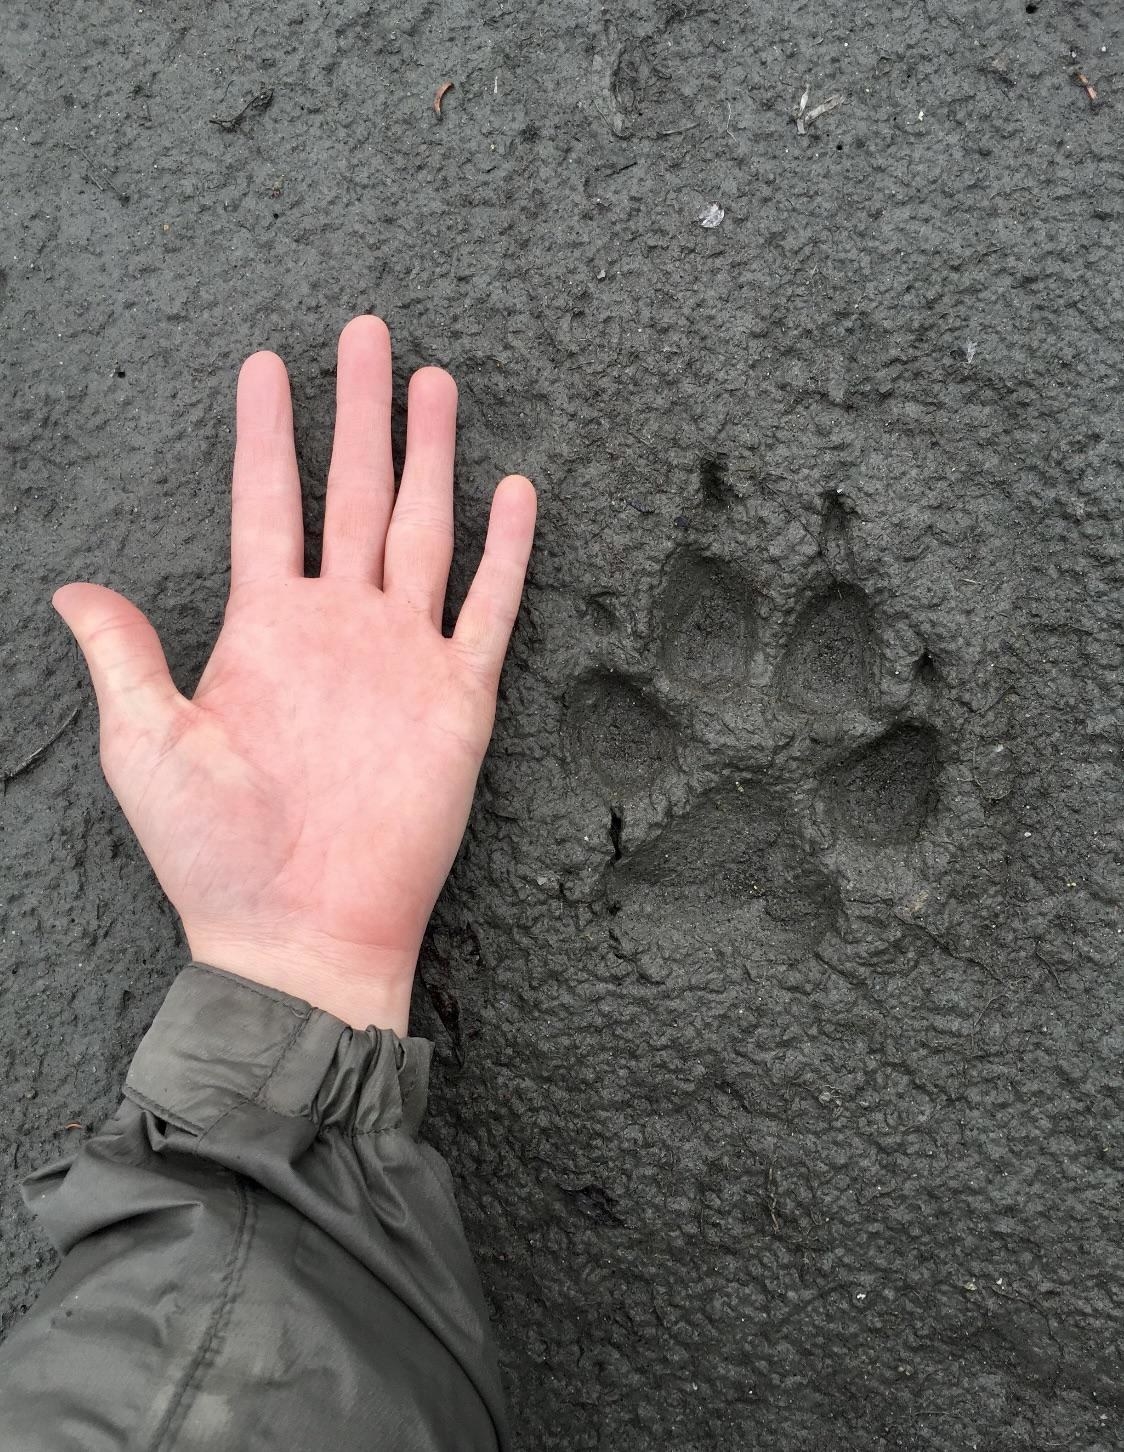 Human hand whose fingers extend above the paw print of similar width next to it